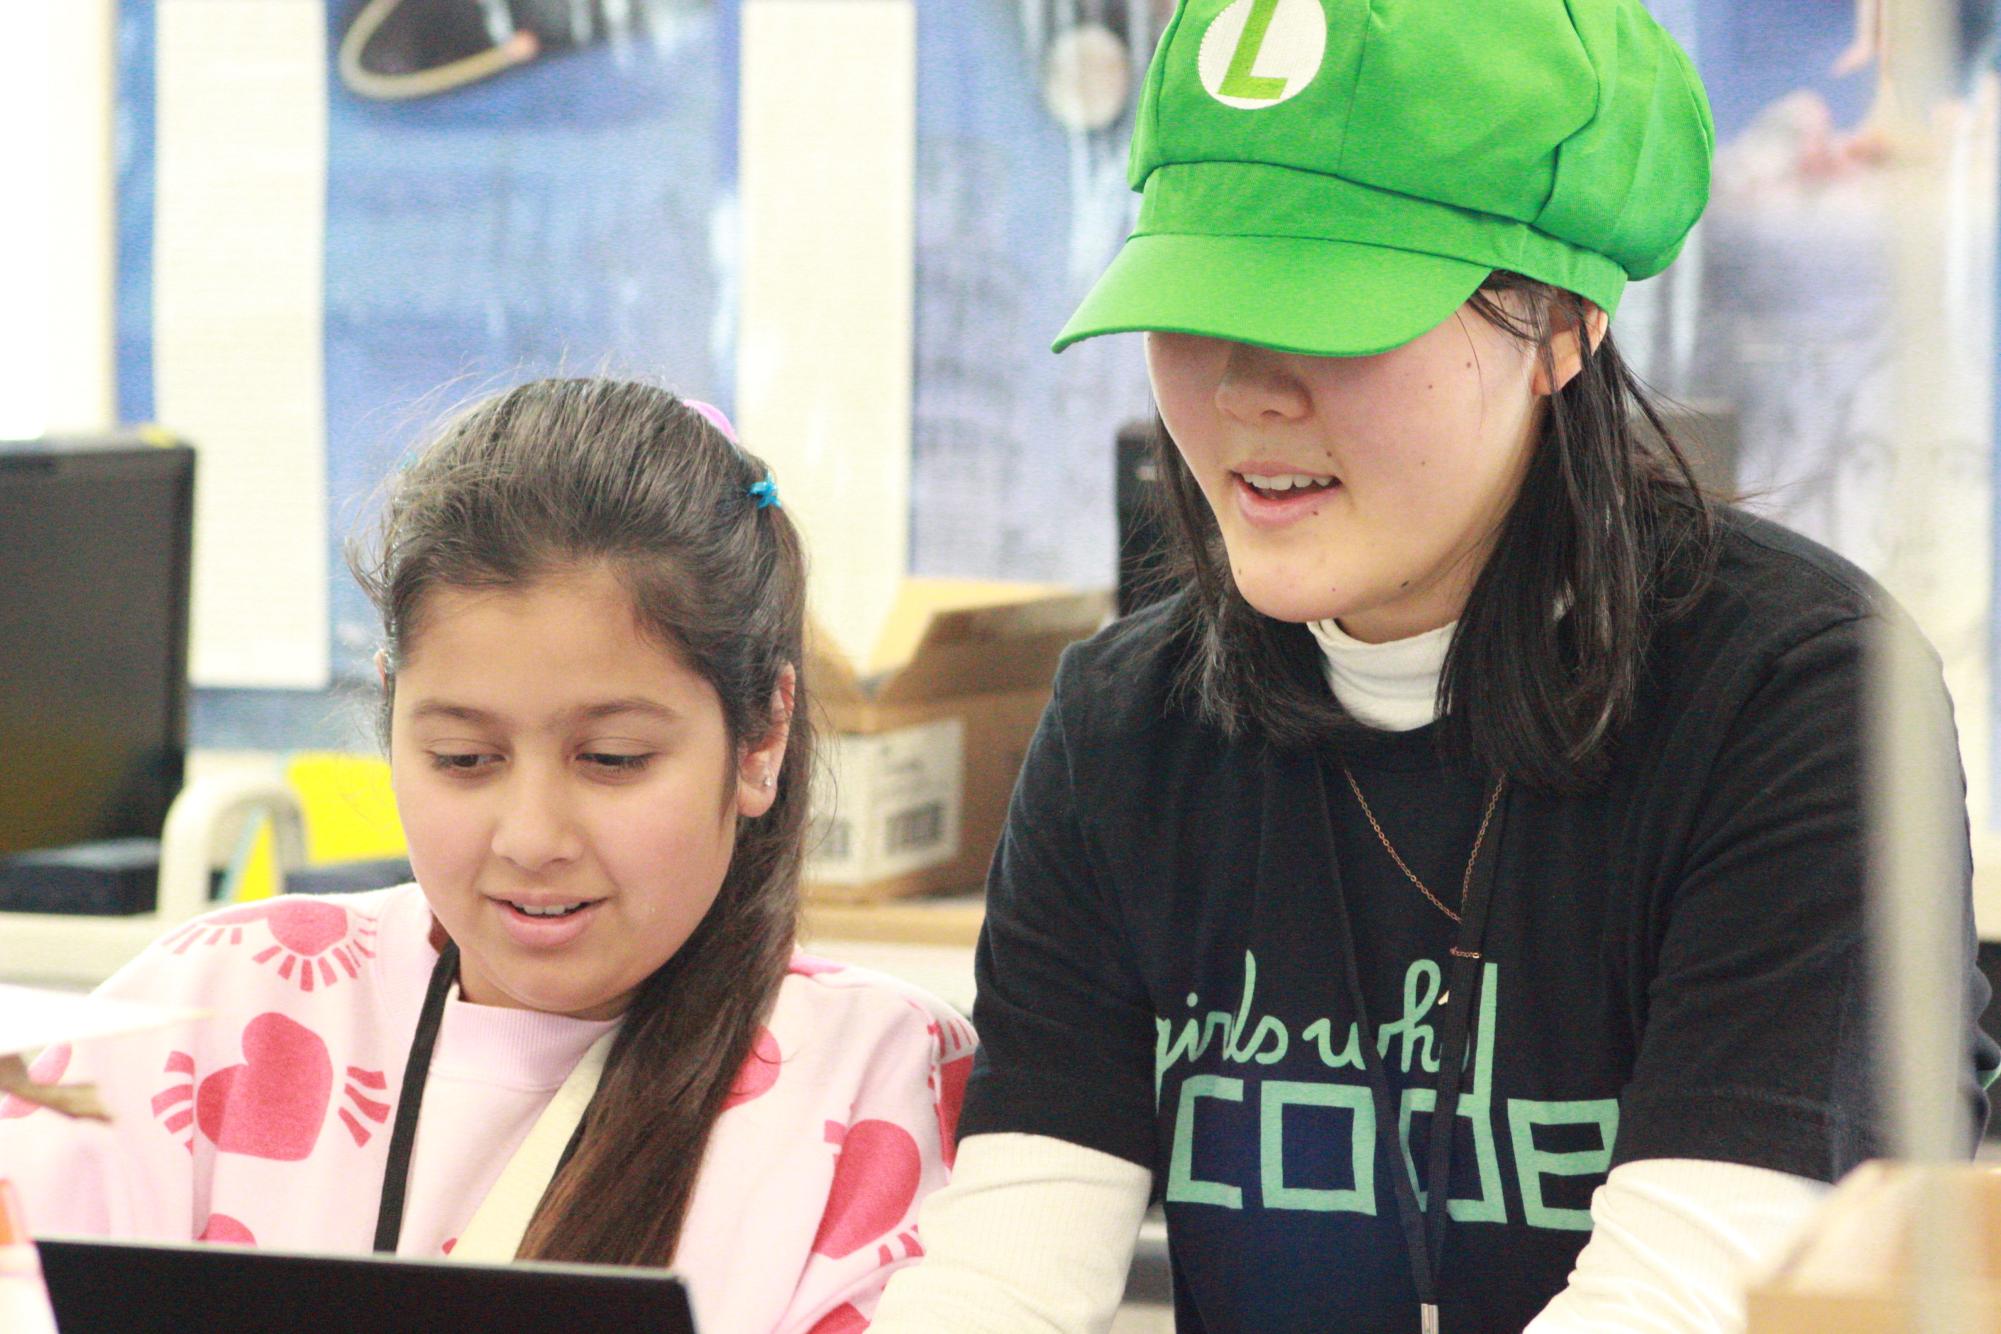 Girls+Who+Code+host+fifth+annual+Summit+for+middle+and+elementary+schoolers